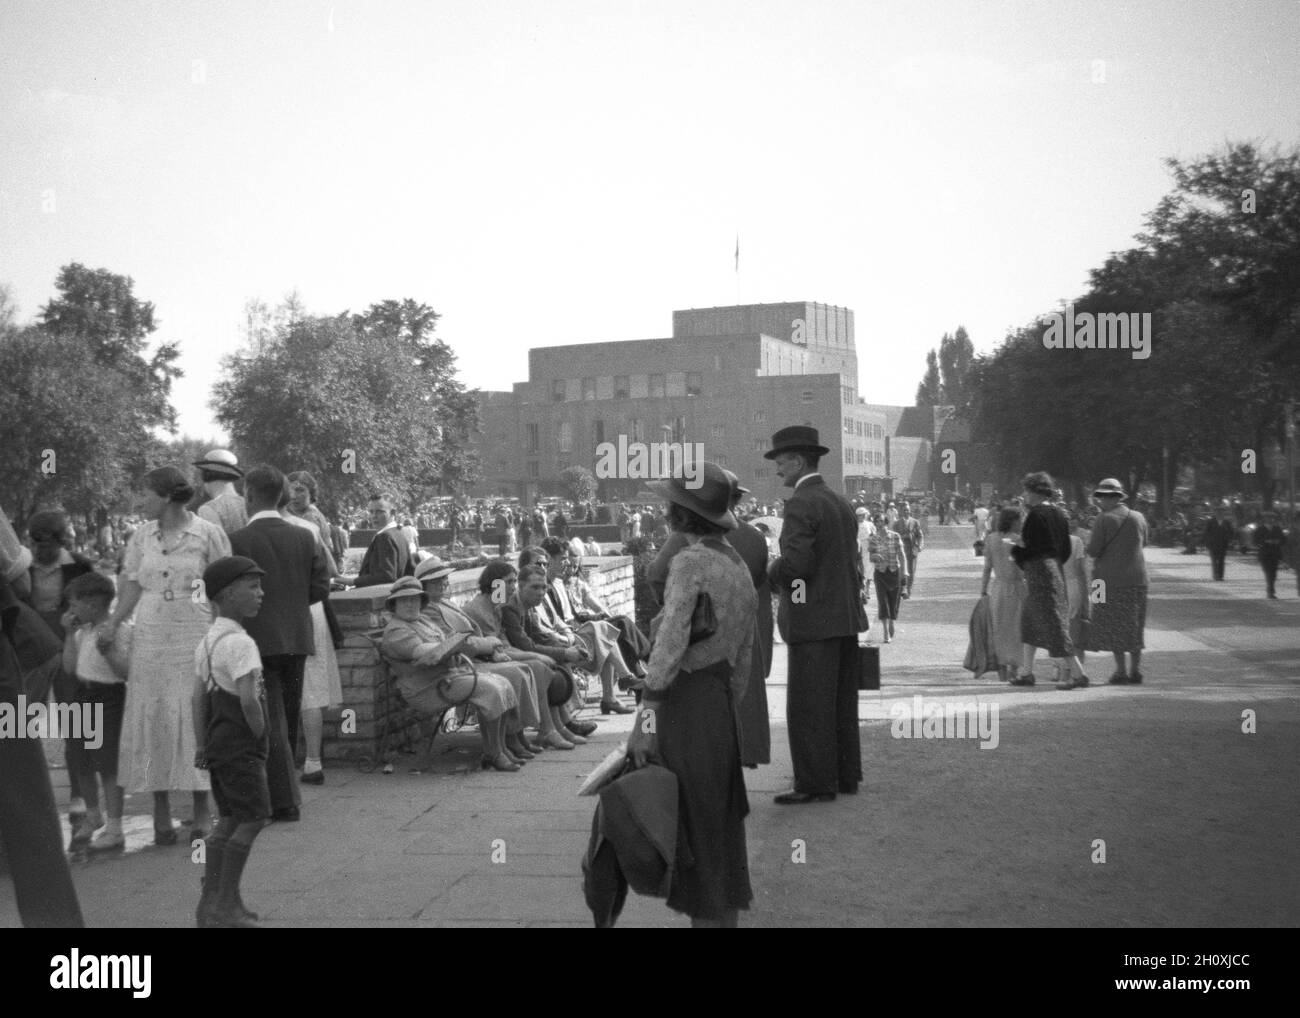 1930s, historical, a gathering of people in Bancroft Gardens beside the new Shakespeare Memorial Theare in Stratford-Upon-Avon, England, UK. The original Memorial Theatre had opened on the banks of the river Avon in 1879 and the one seen in the distance here, designed by a female architect, Elisabeth Scott and on a site next to the original one, opened in 1932 . In 1961, It was renamed the Royal Shakespeare Theatre, following the creation of the Royal Shakespeare Company (RSC) the previous year. Stock Photo